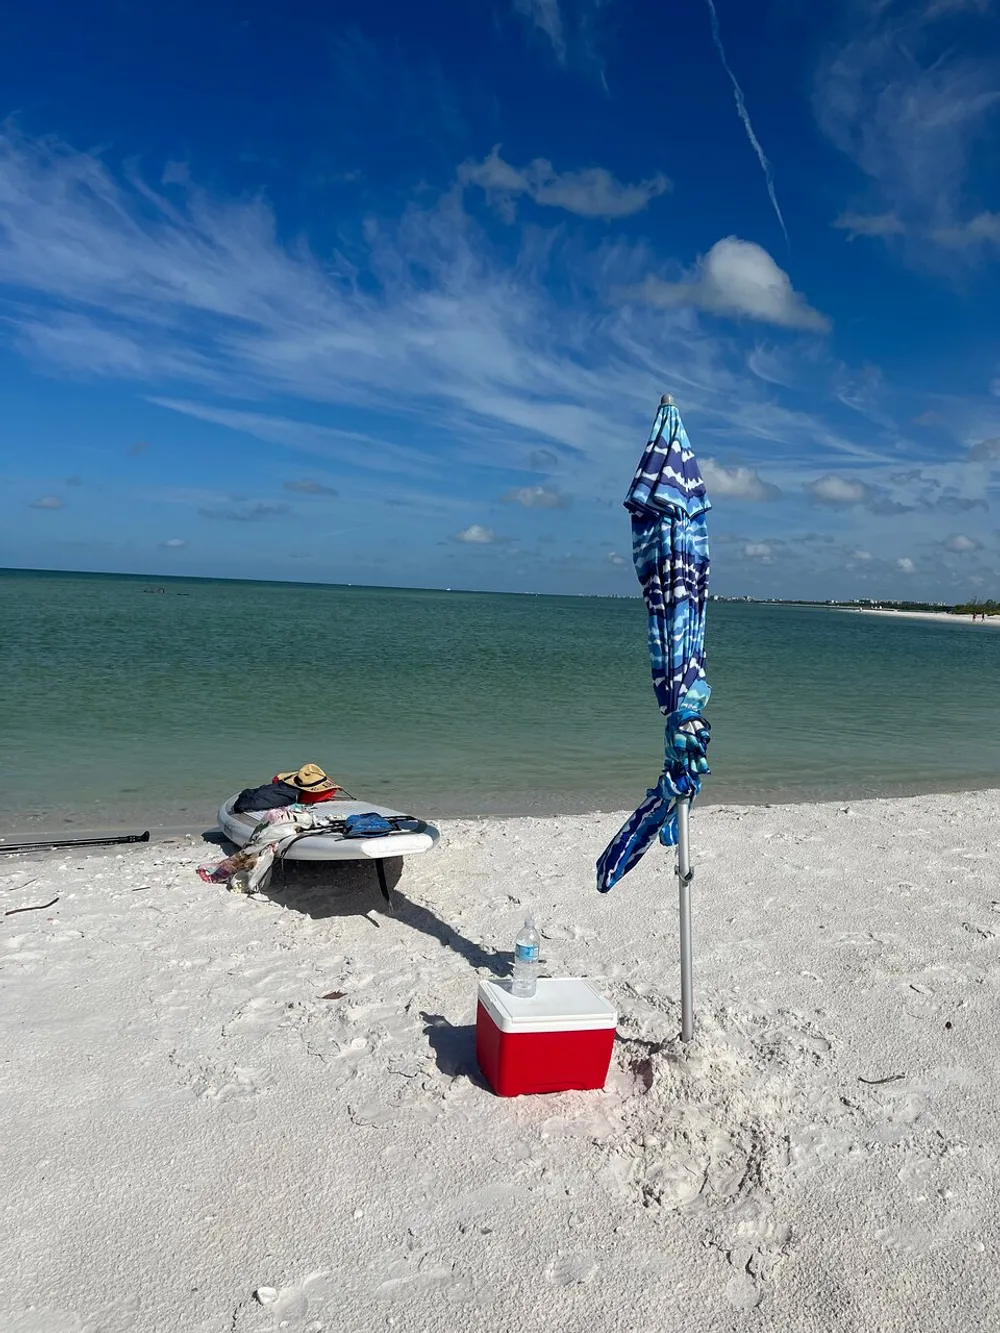 A blue and white umbrella is anchored in a sandy beach with a paddleboard hat water bottle and cooler nearby against a backdrop of calm waters and a blue sky with wispy clouds